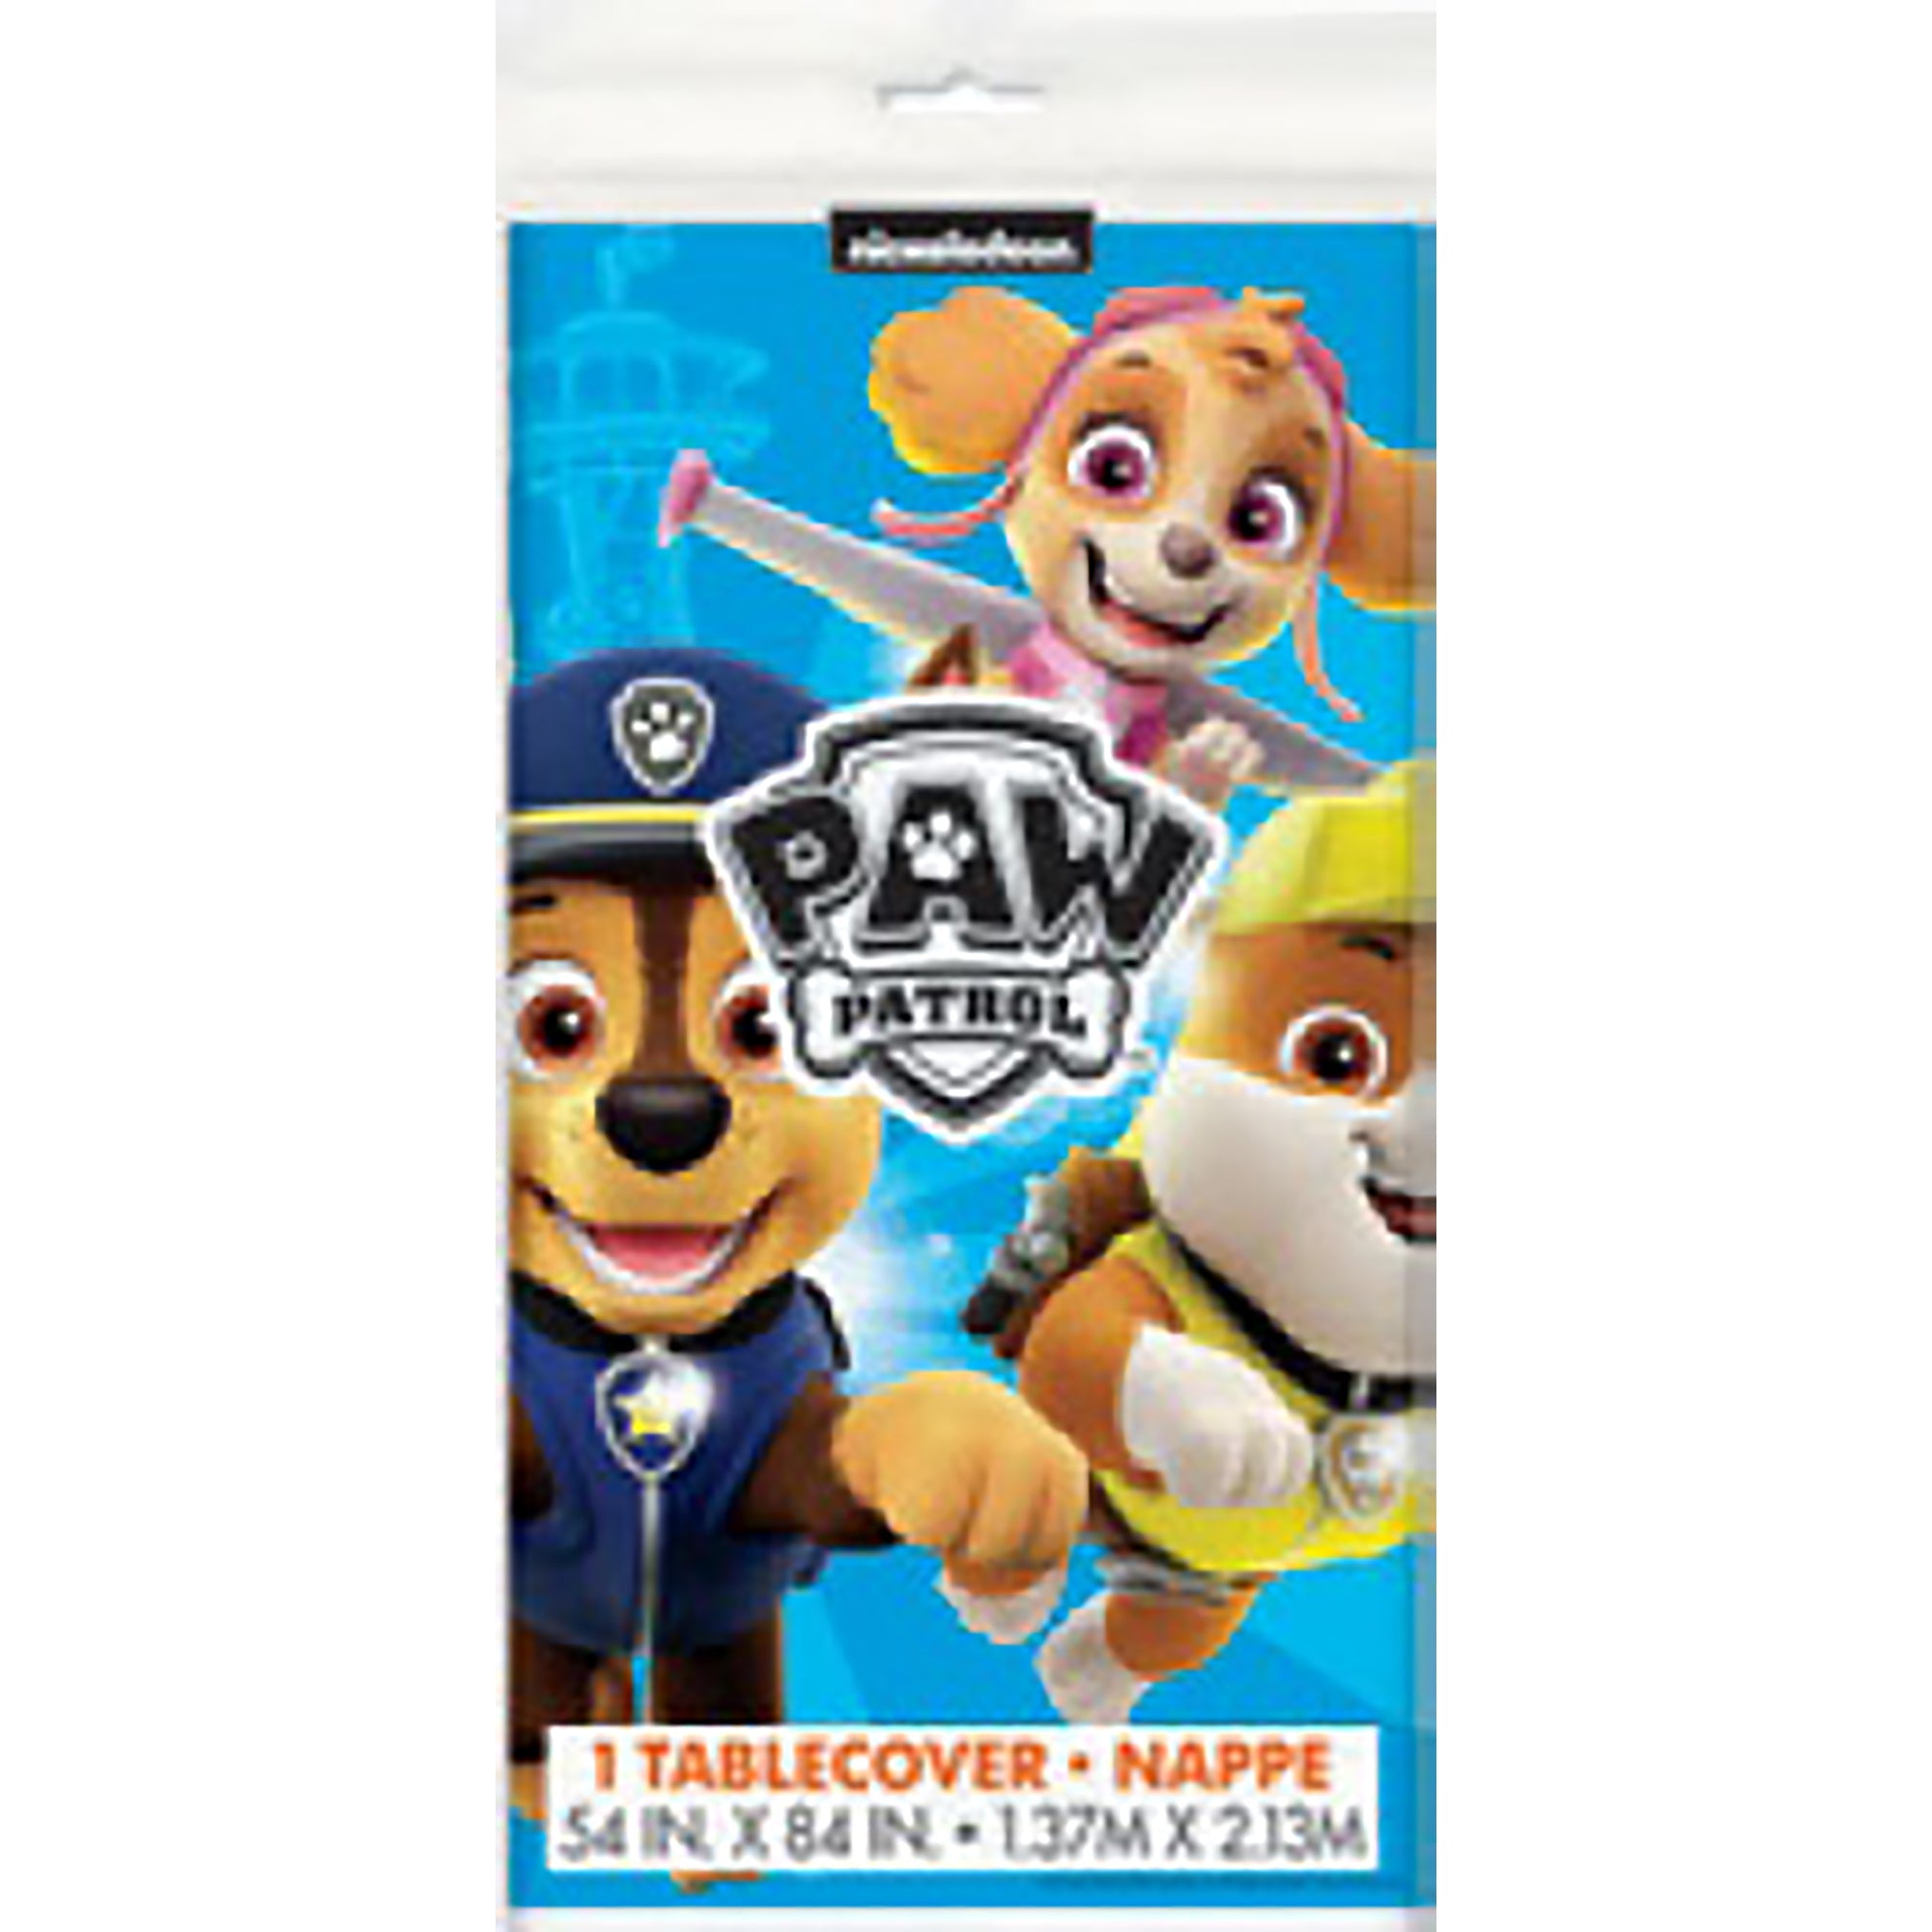 Paw Patrol Plastic Table Cover 54x84in